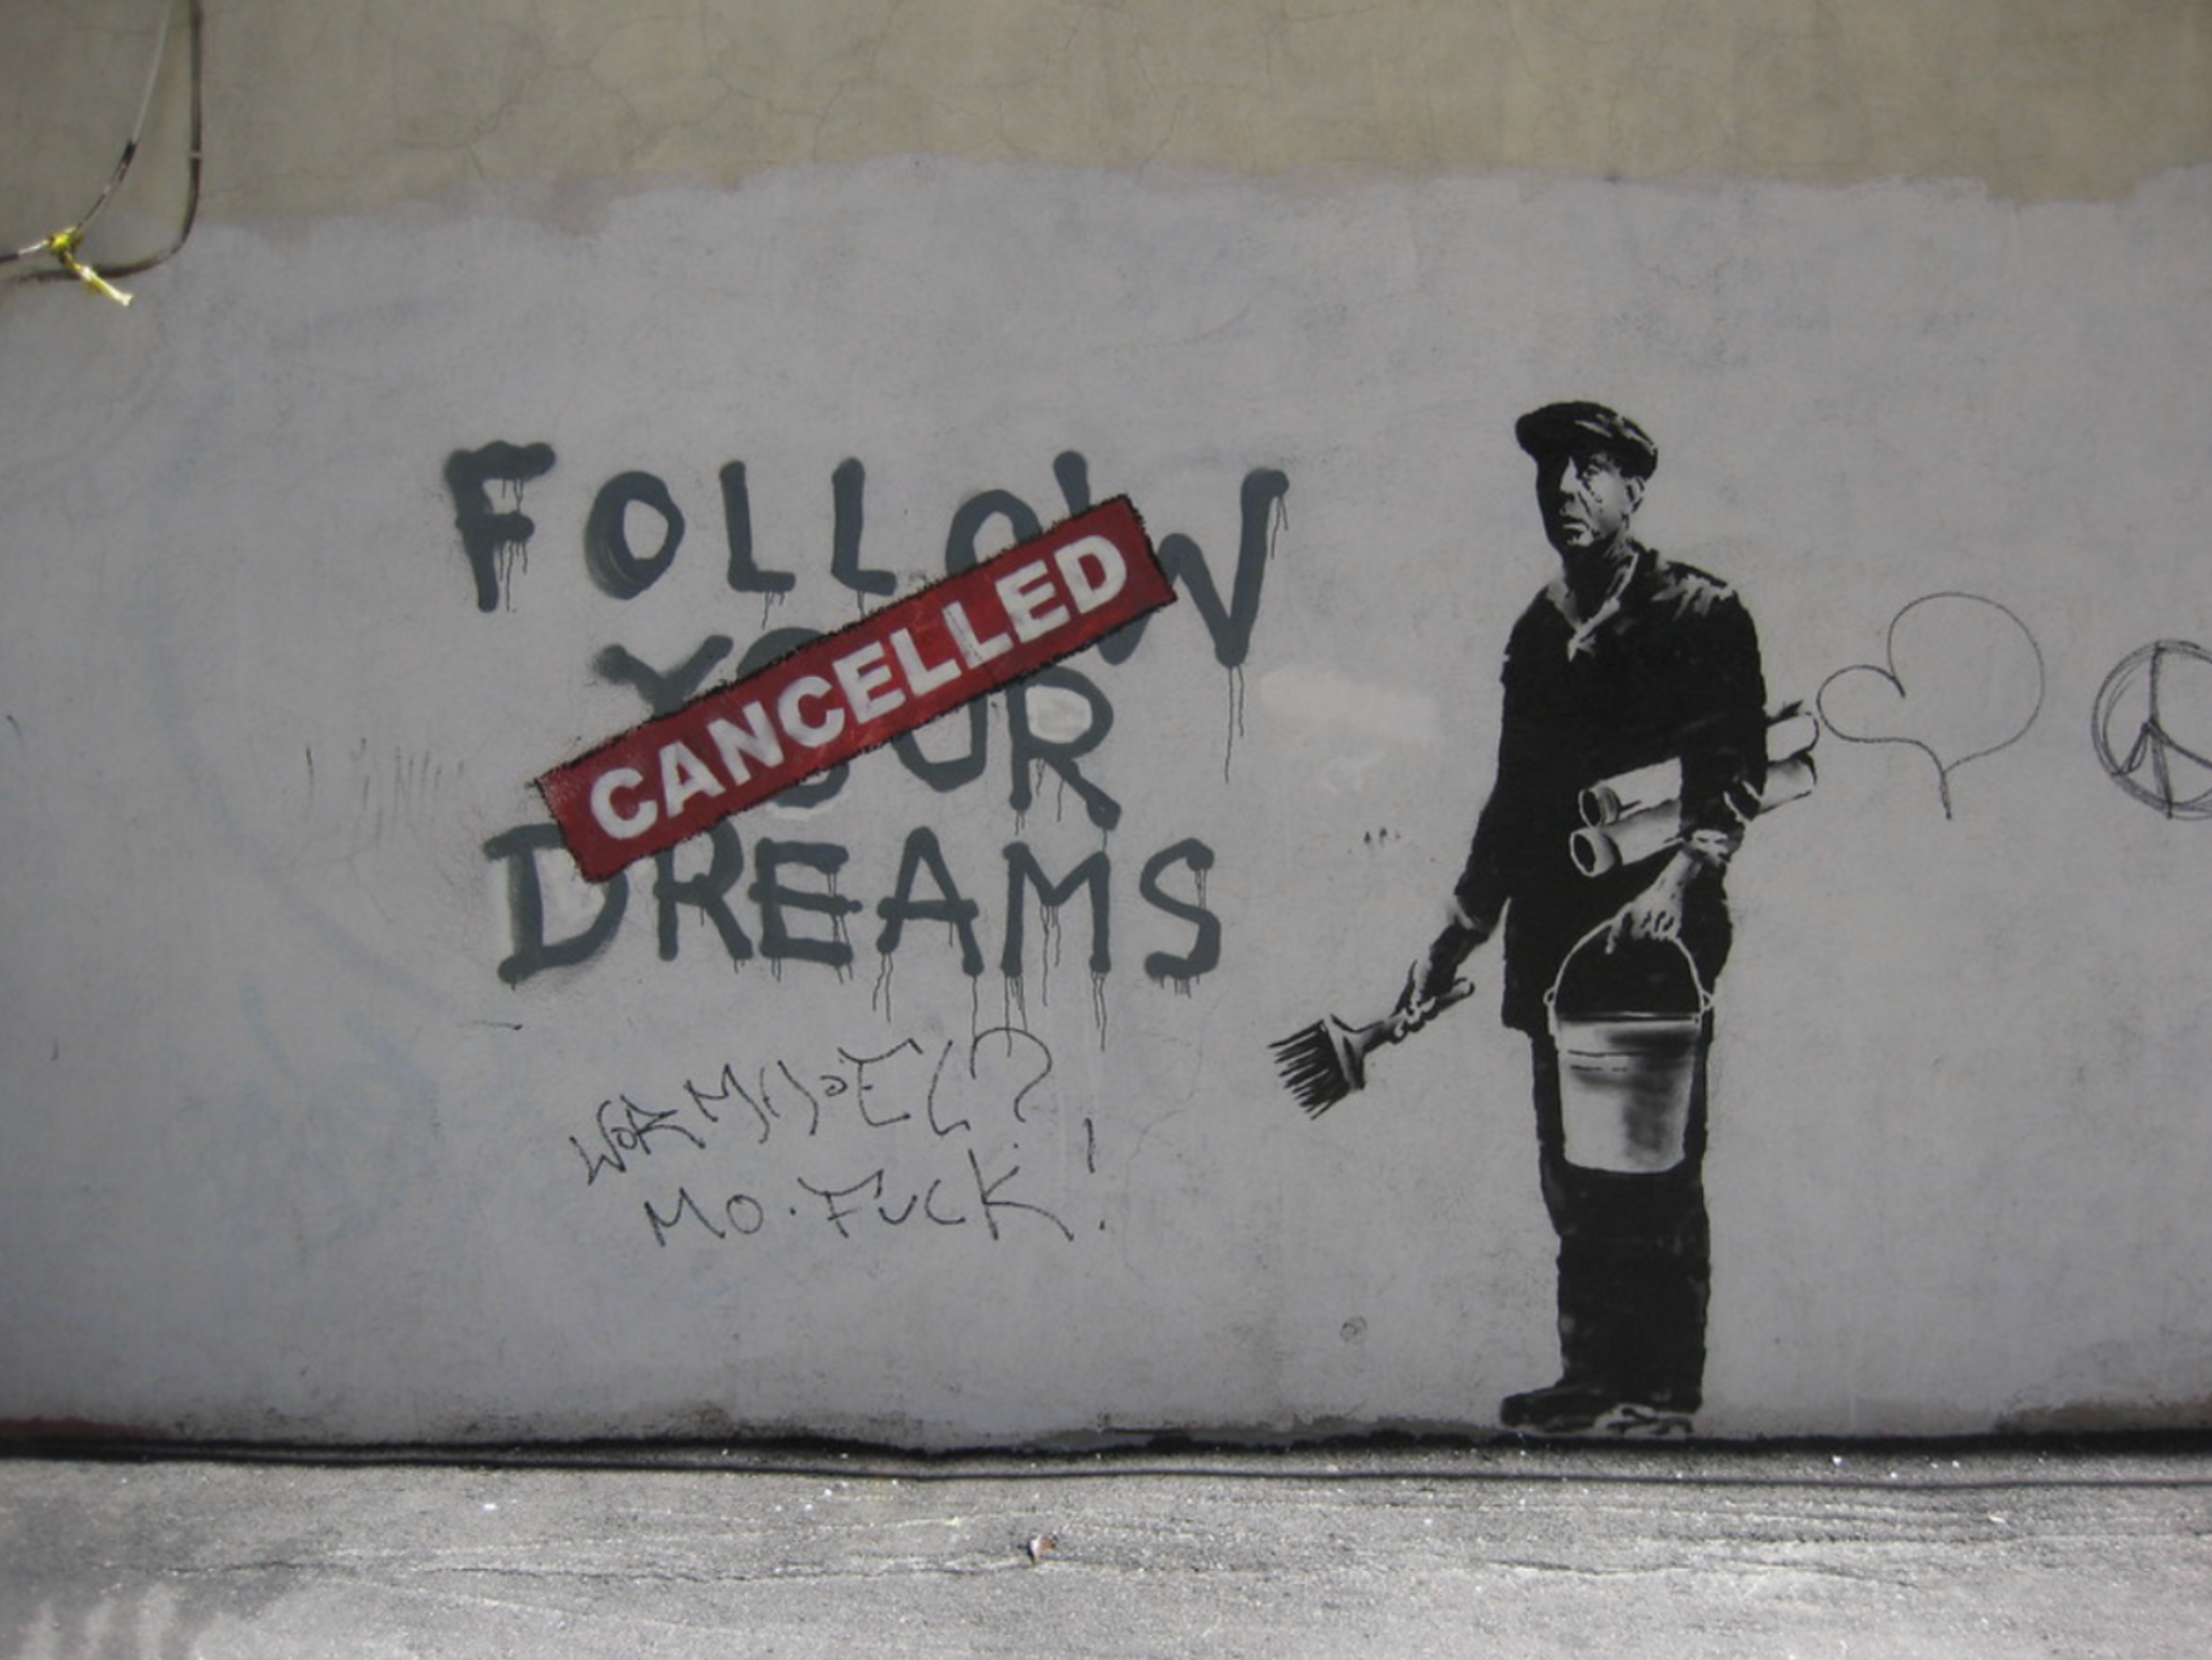 Follow Your Dreams (Cancelled) by Banksy